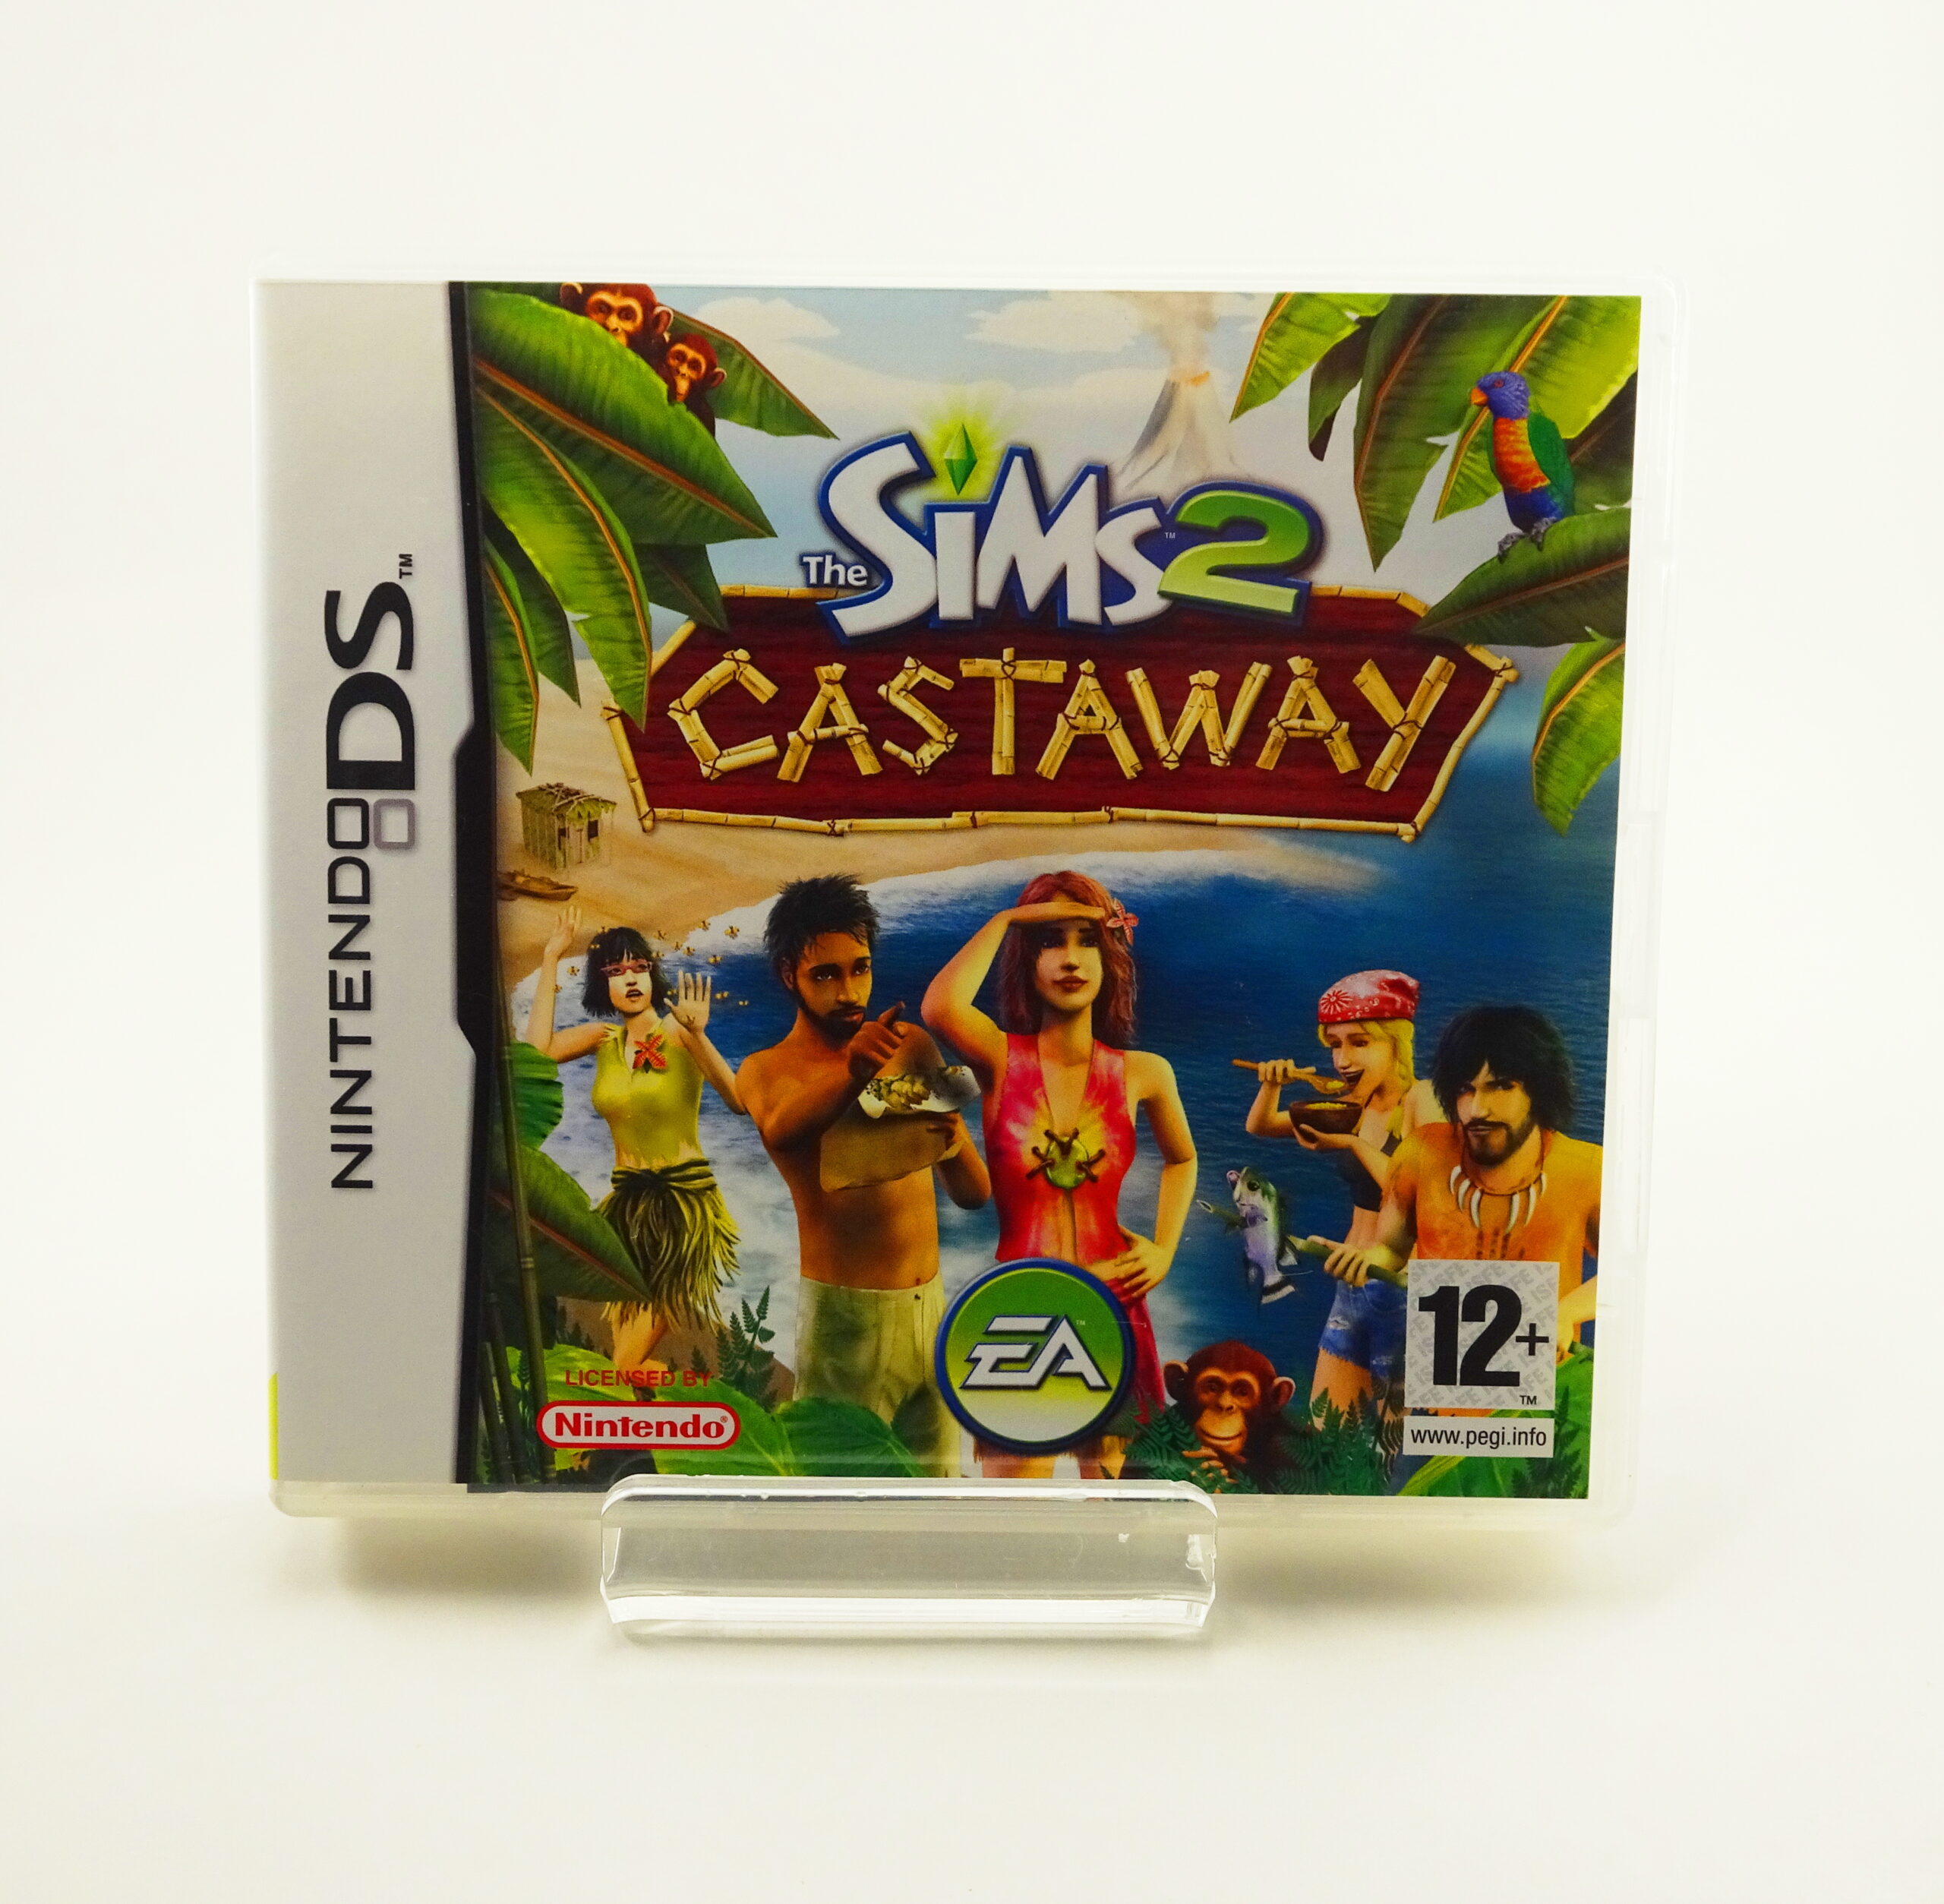 The Sims 2 Castaway (DS)